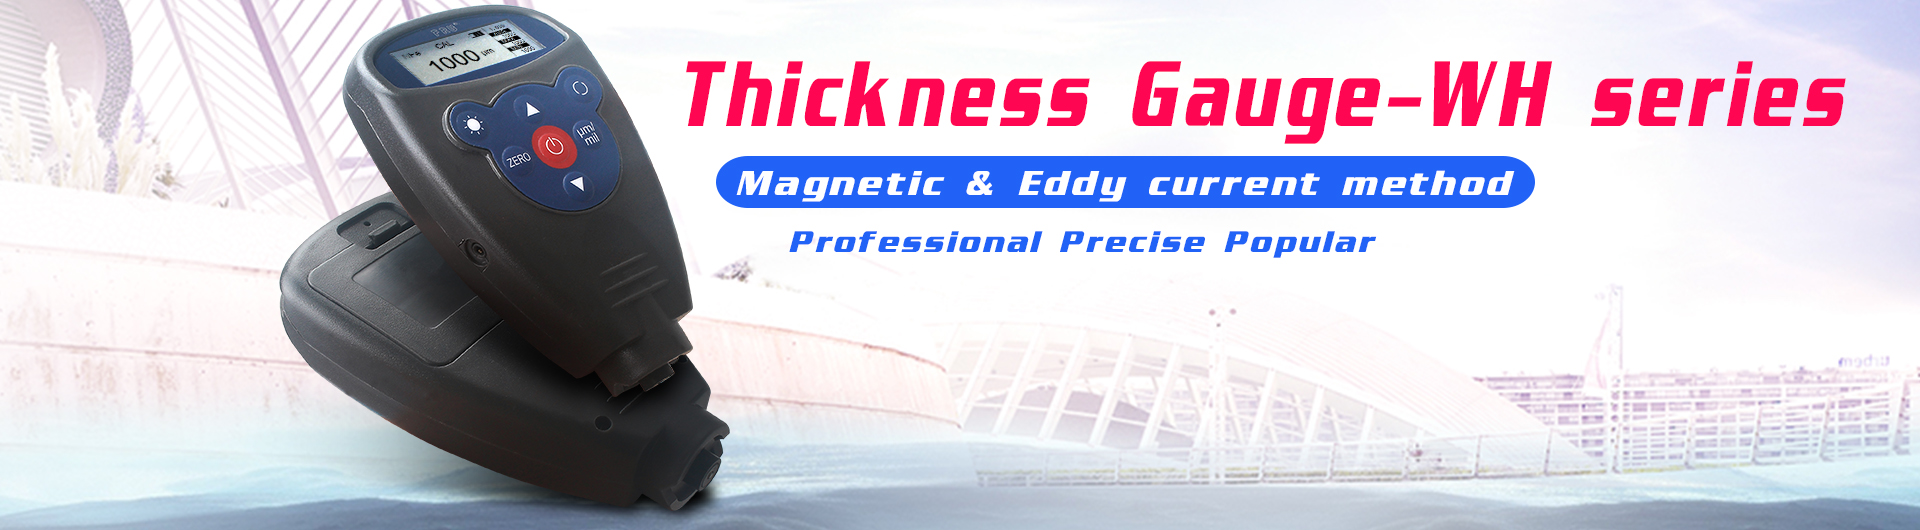 WH coating thickness gauge